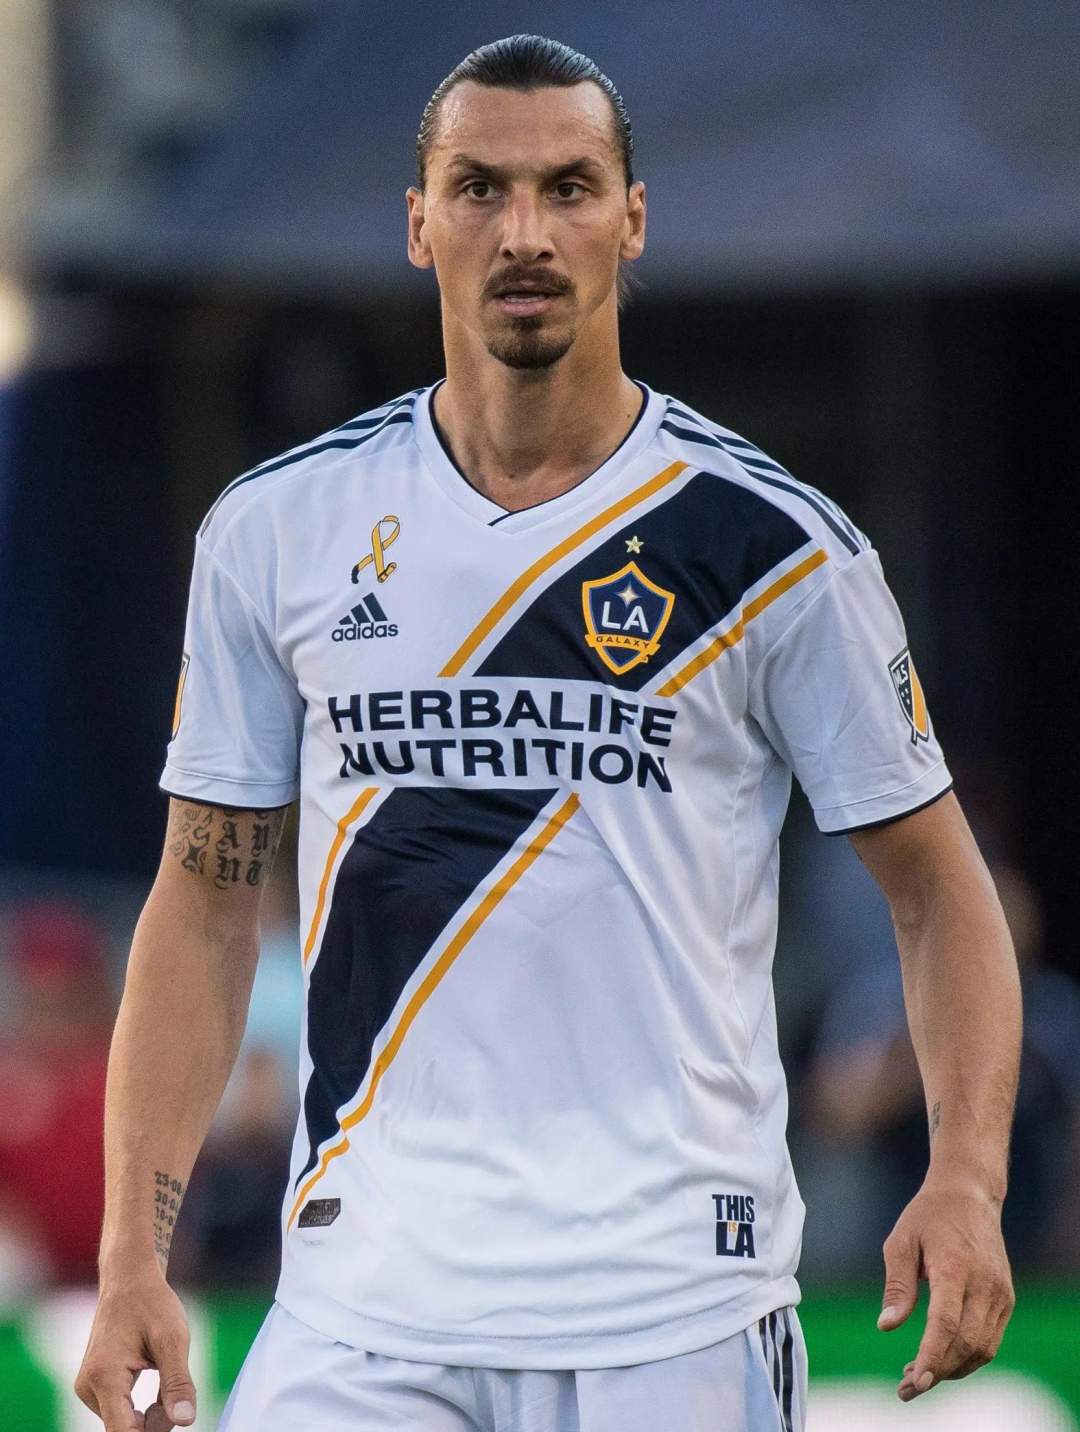 Naira Marley reacts after Ibrahimovic said 'There can only be one ZLATAN'